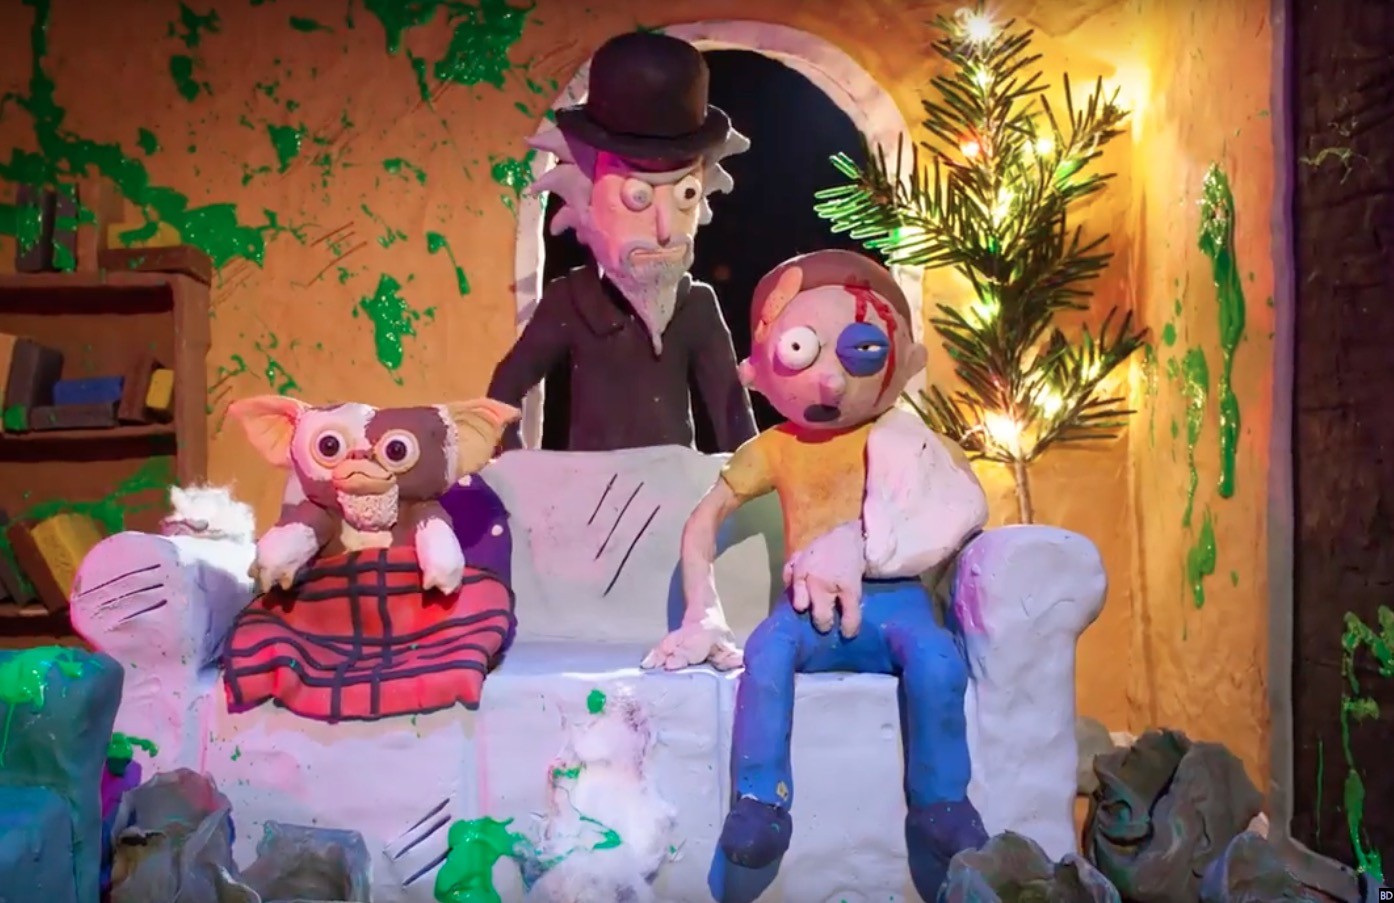 Rick and Morty" Claymation Shorts Spoof 'Poltergeist', 'Gremlins' and  'Re-Animator'! - Bloody Disgusting